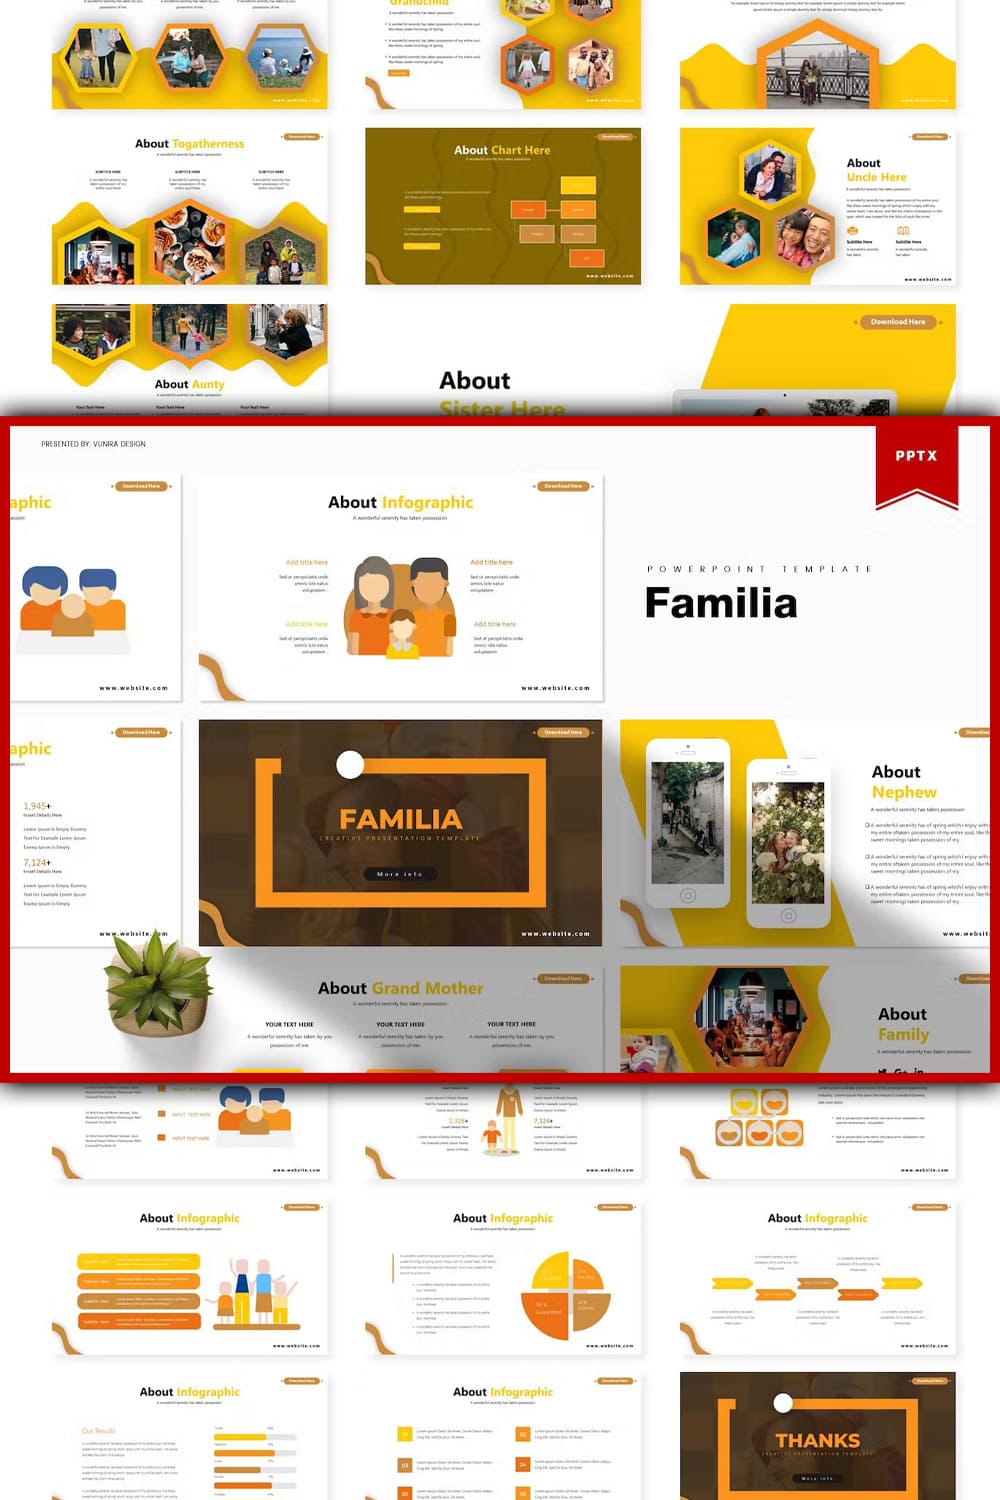 Familia powerpoint template - pinterest image preview.